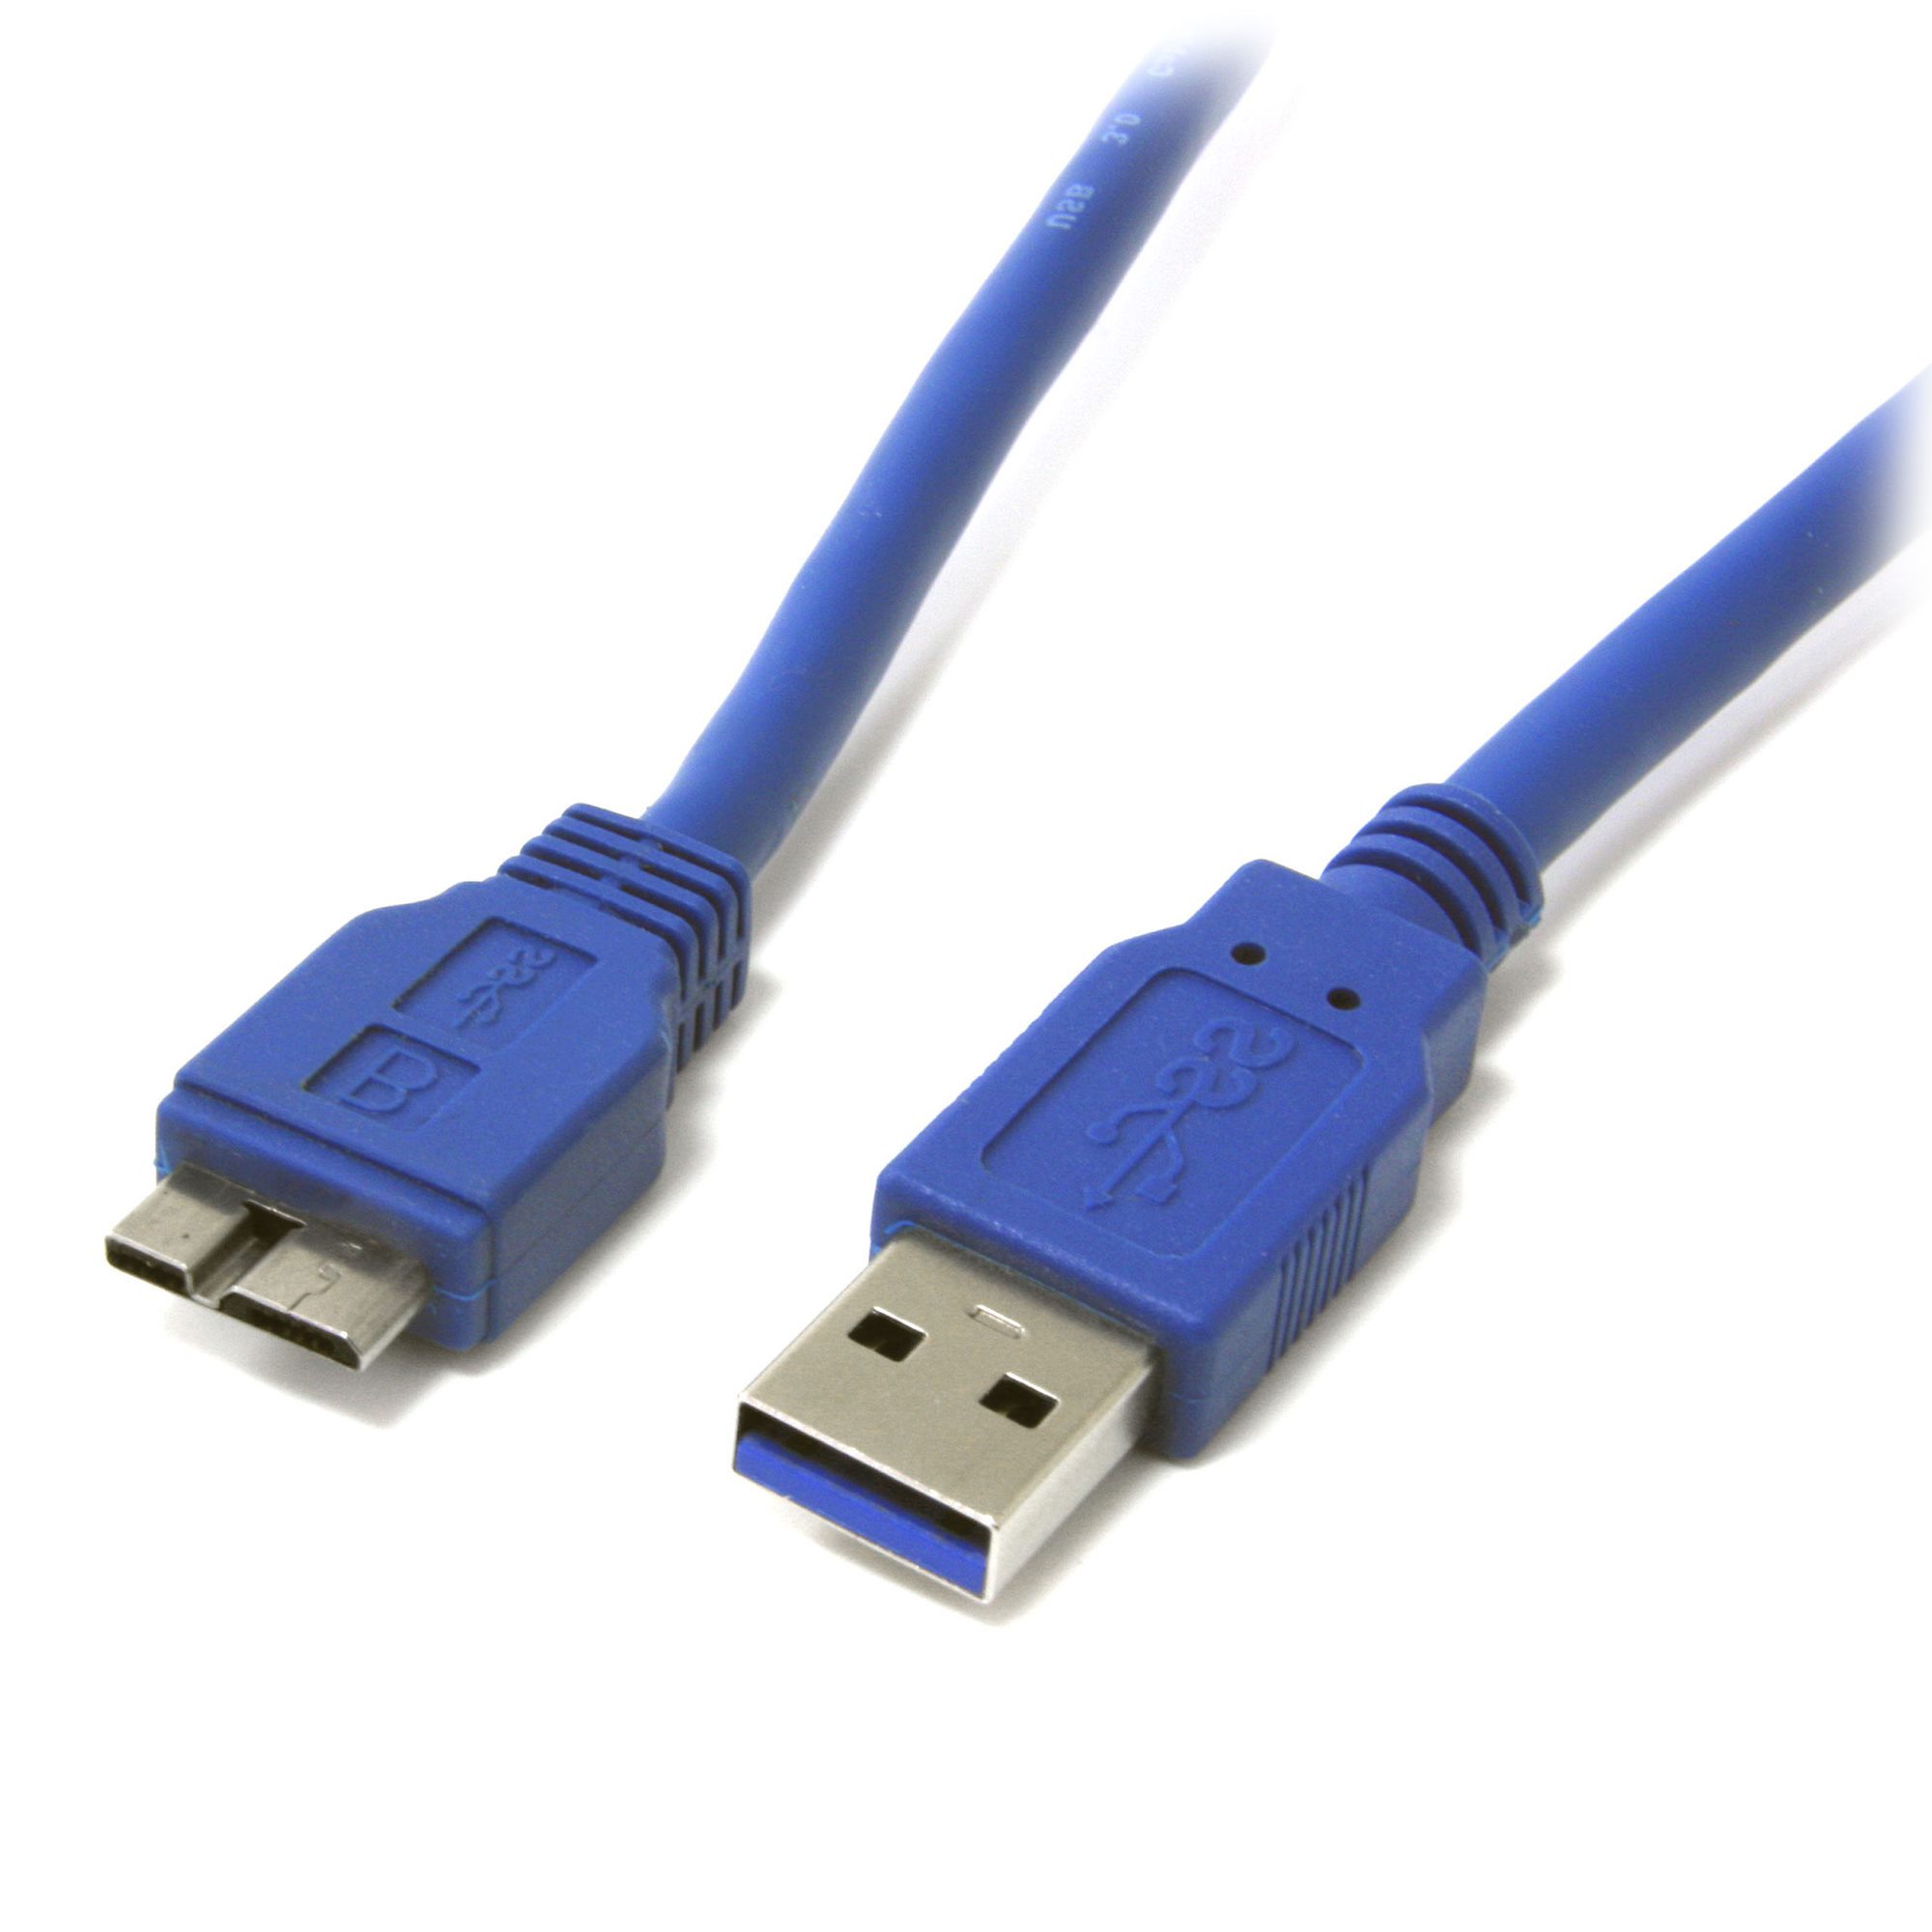 Buitensporig Shipley Voorbijgaand 1 ft USB 3.0 Cable A to Micro B - USB 3.0 Cables | StarTech.com